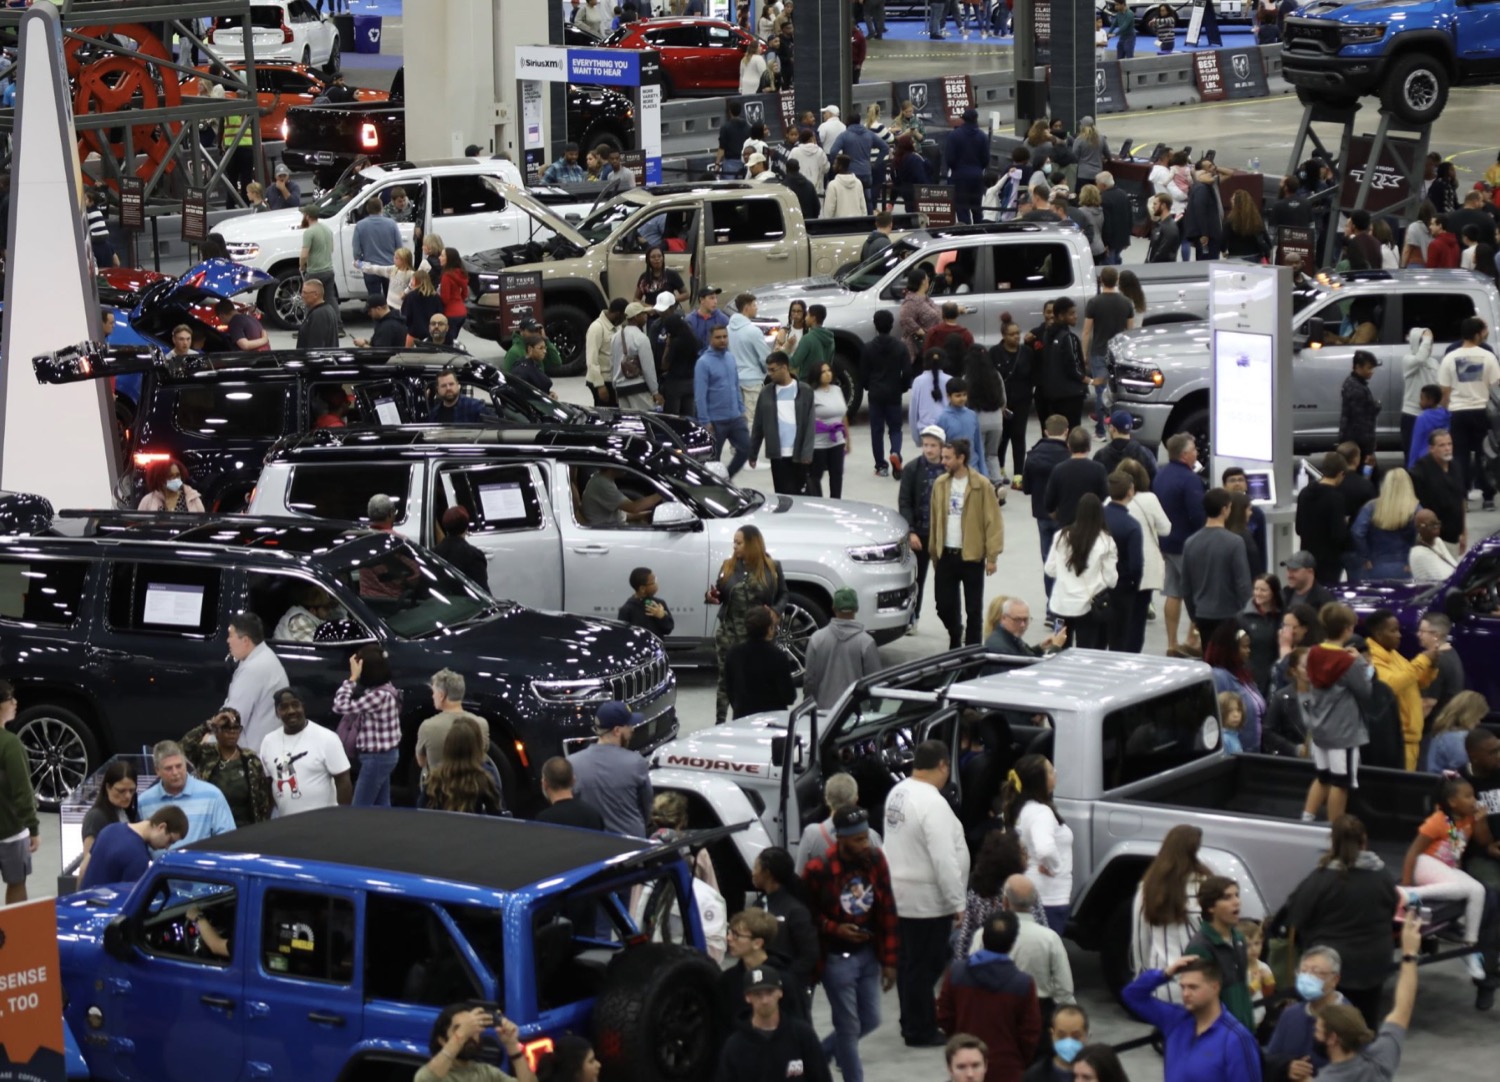 More Than One City Claims to Host 'Biggest' Auto Show